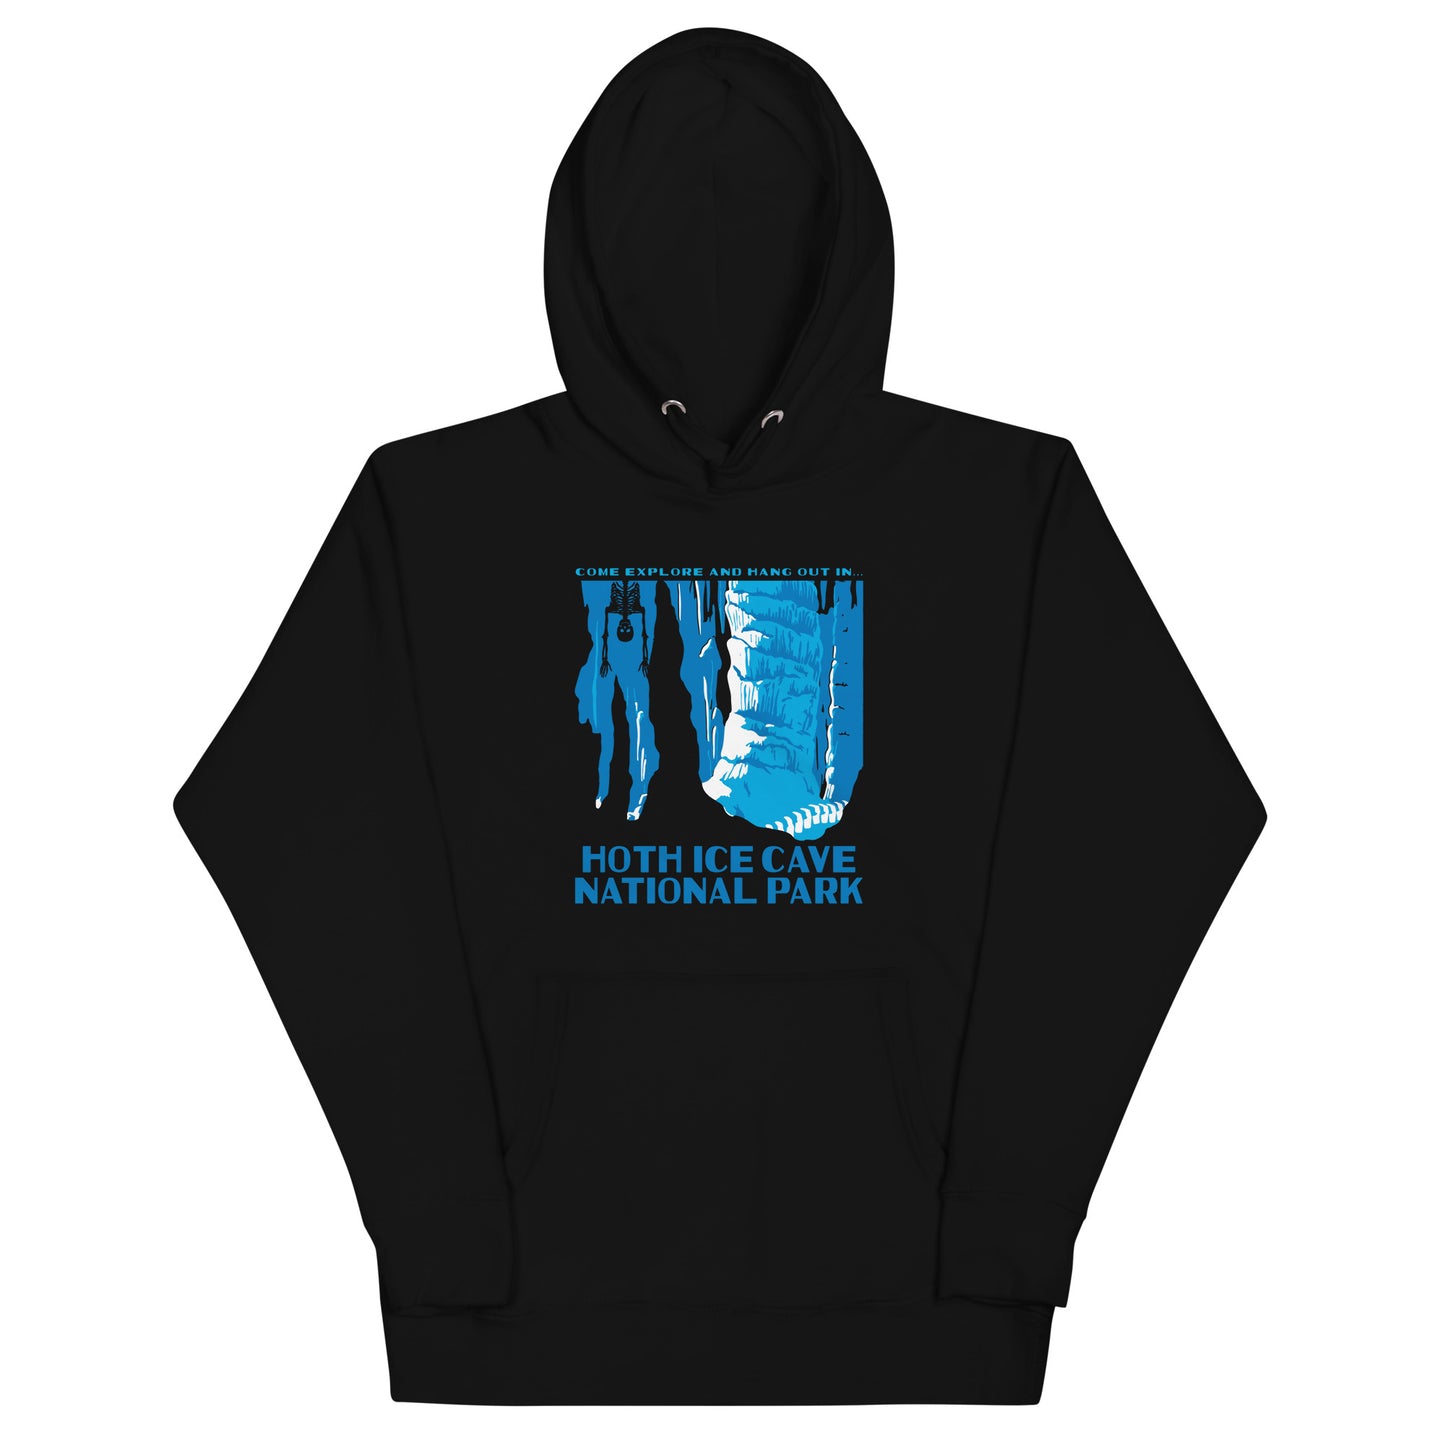 Hoth Ice Cave National Park Unisex Hoodie